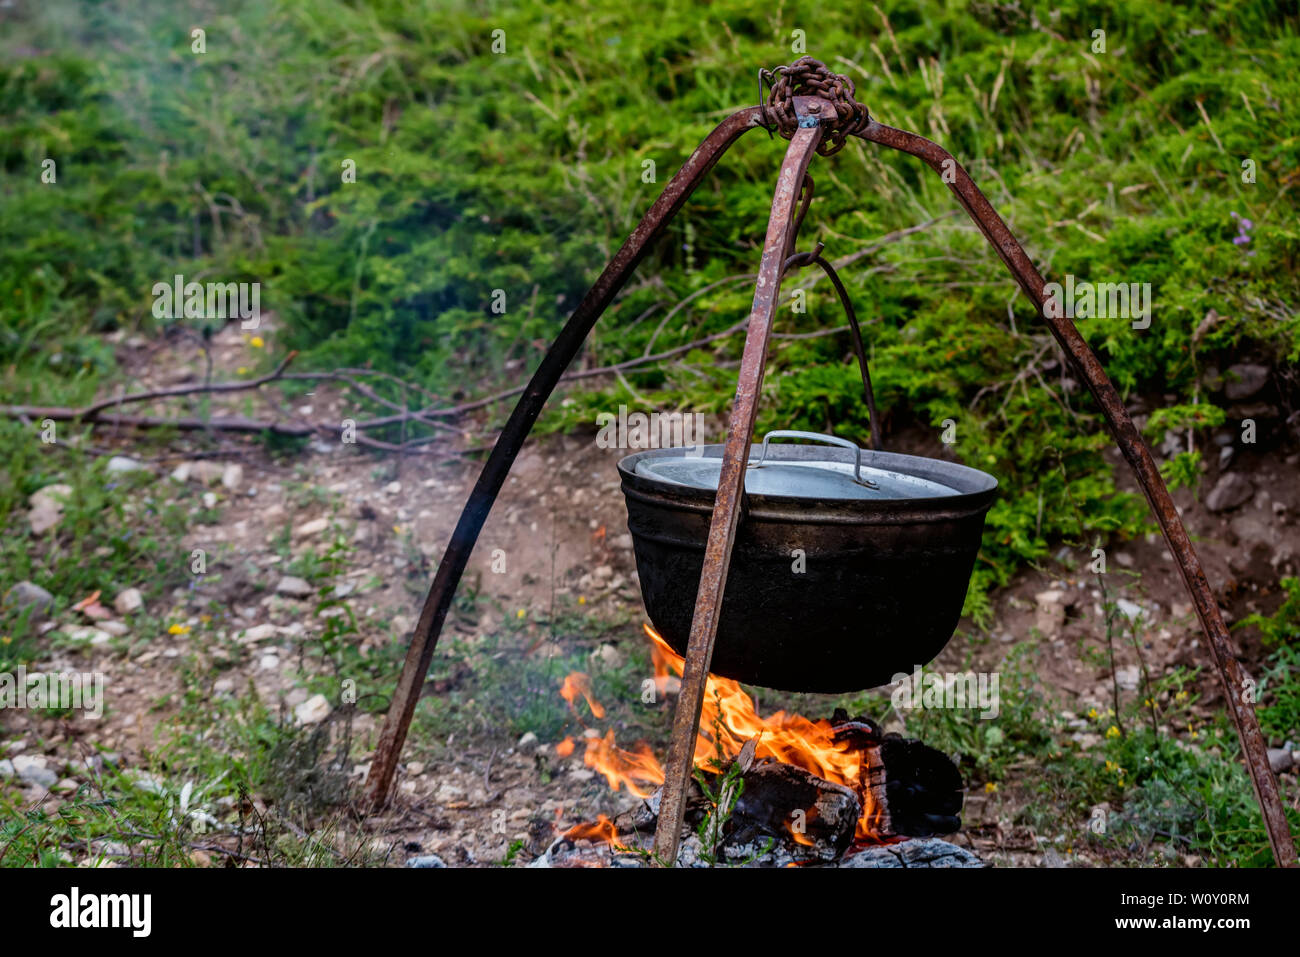 https://c8.alamy.com/comp/W0Y0RM/cauldron-or-camping-kettle-over-open-fire-outdoors-W0Y0RM.jpg